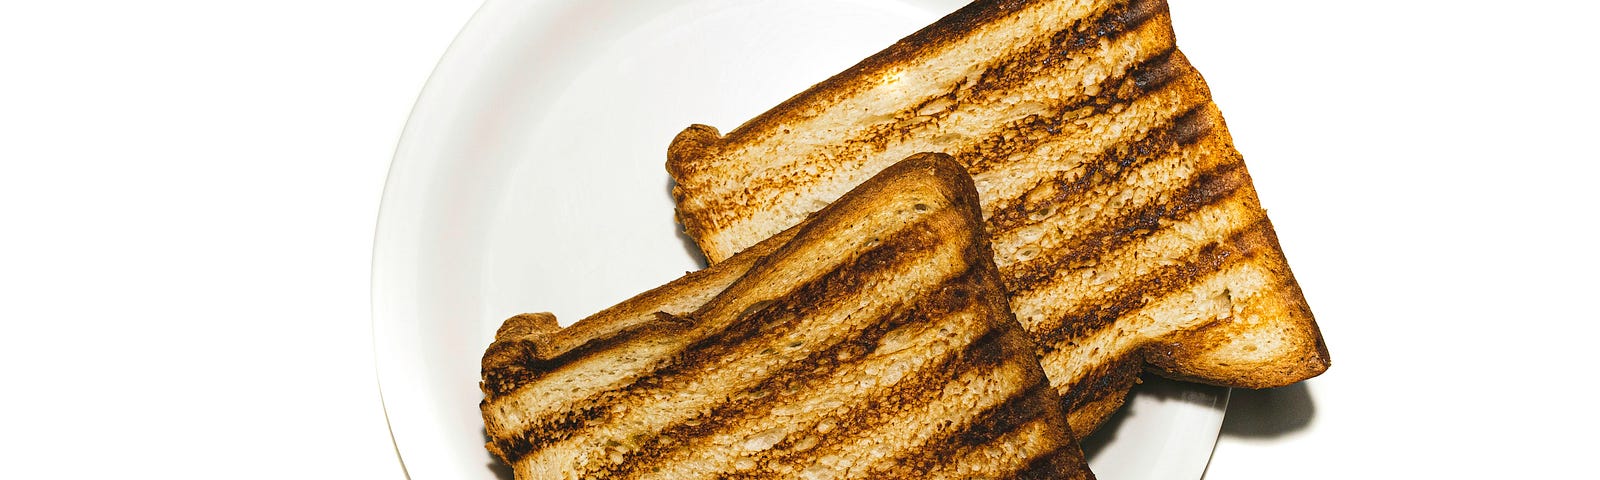 Burnt toast on a white plate.